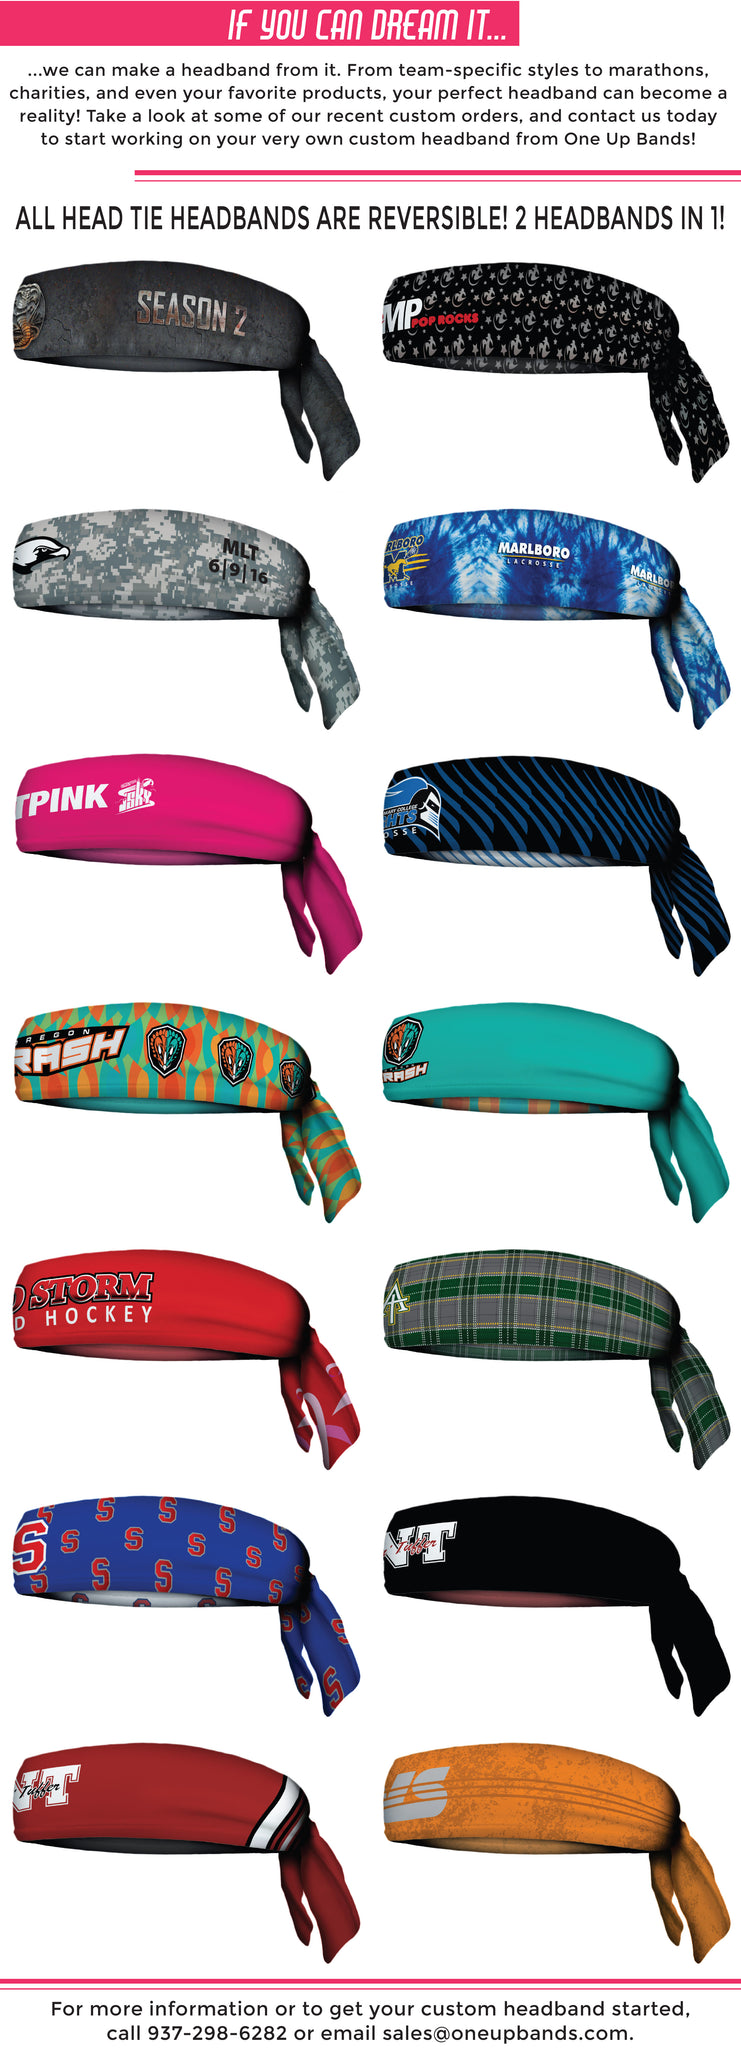 One Up Bands custom head tie headbands examples and information.